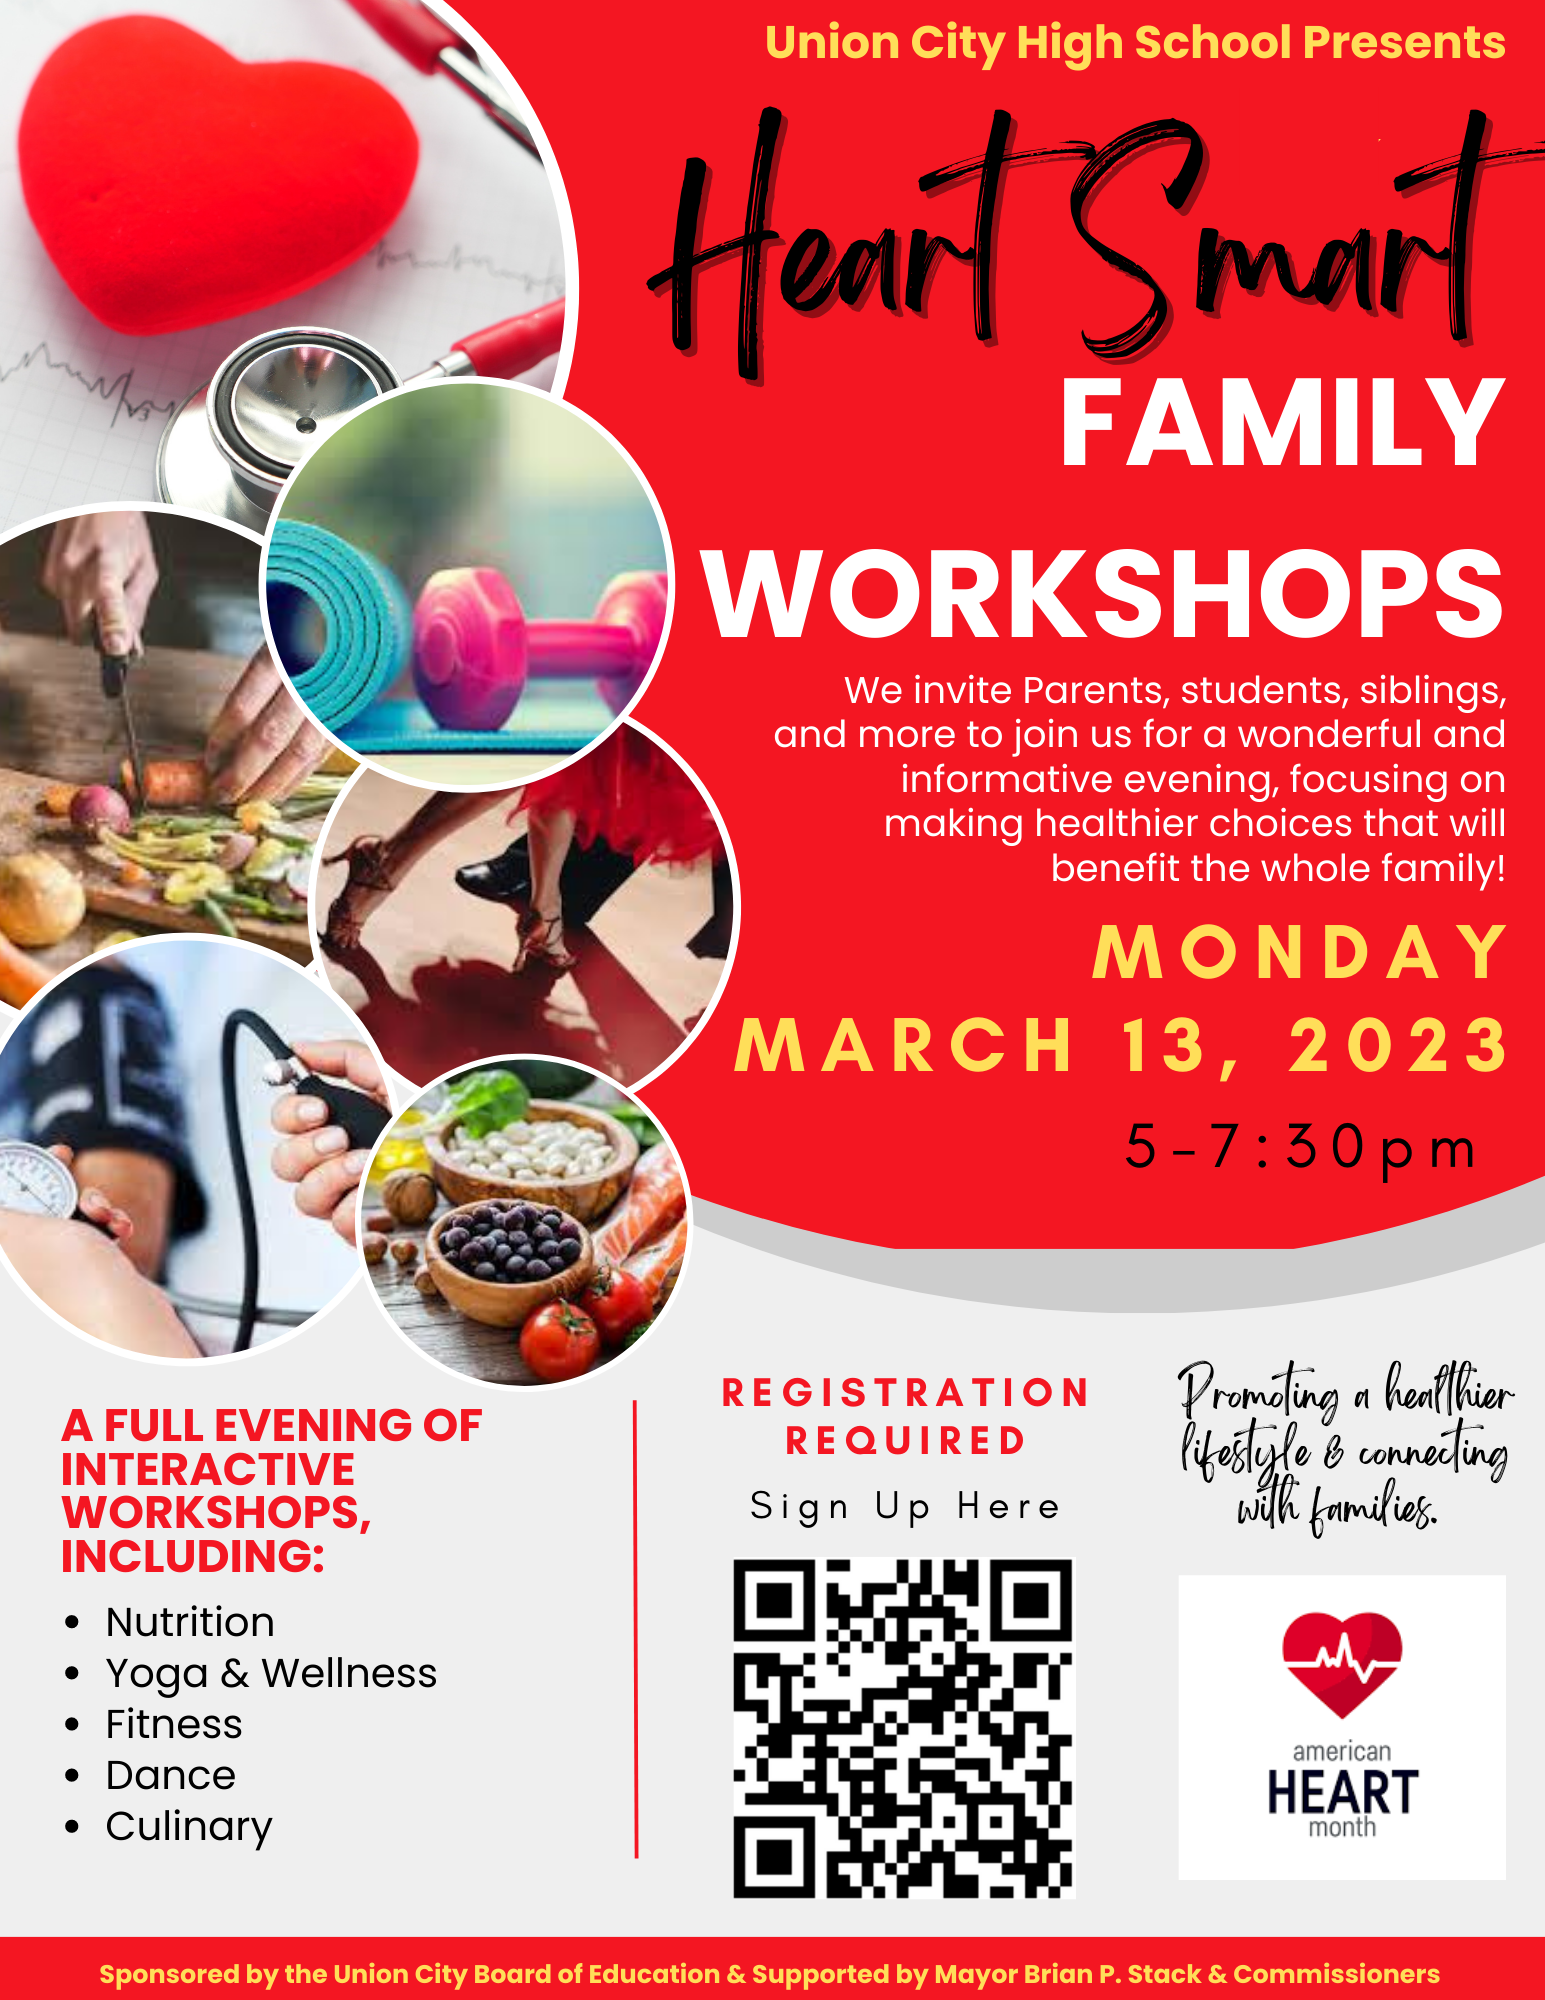 Heart Smart Family Workshop Reminder For Monday March 13, 2023-English